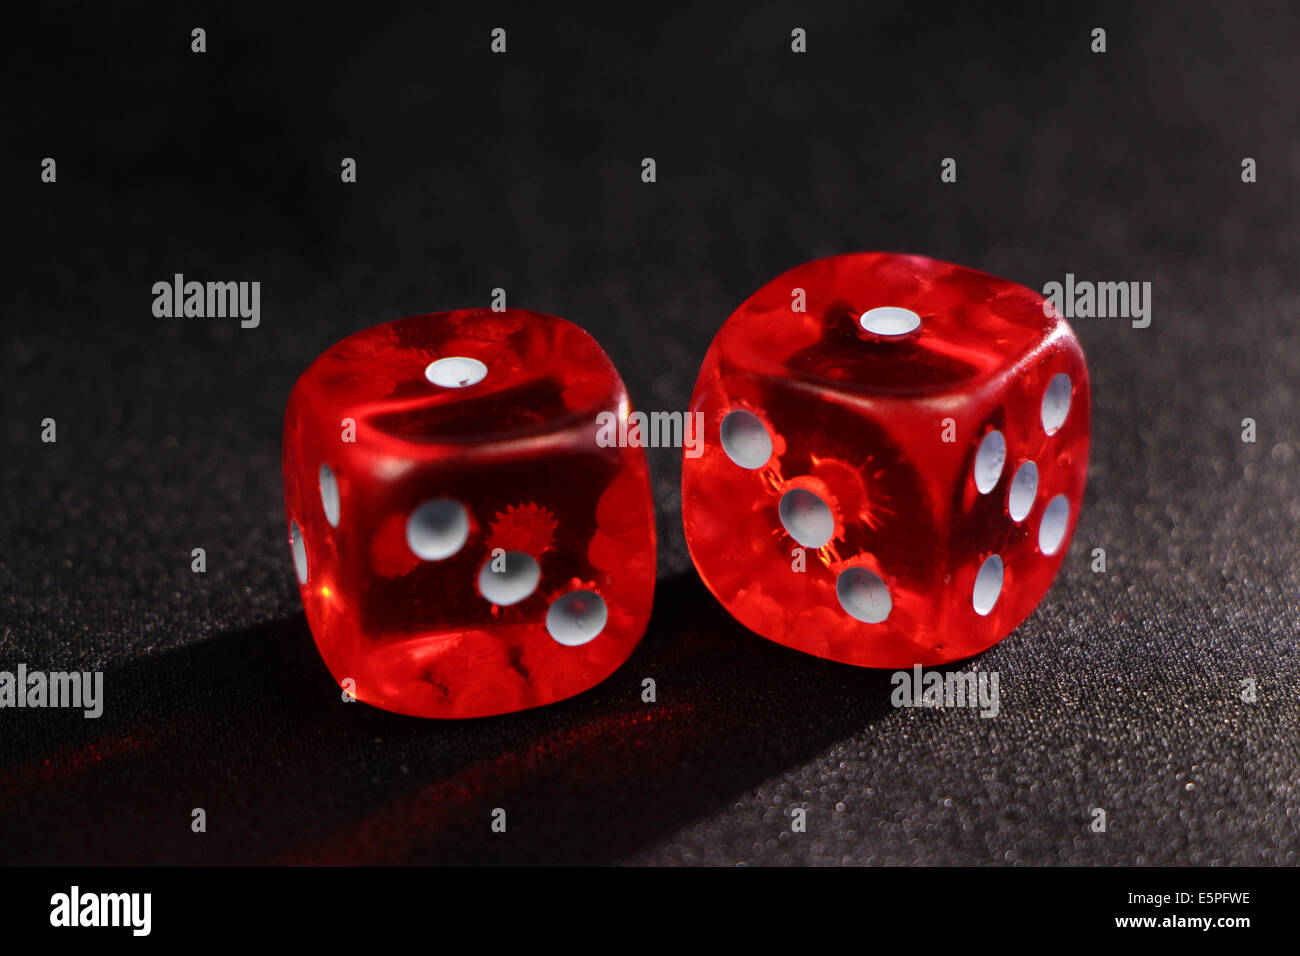 red dice on black background Stock Photo